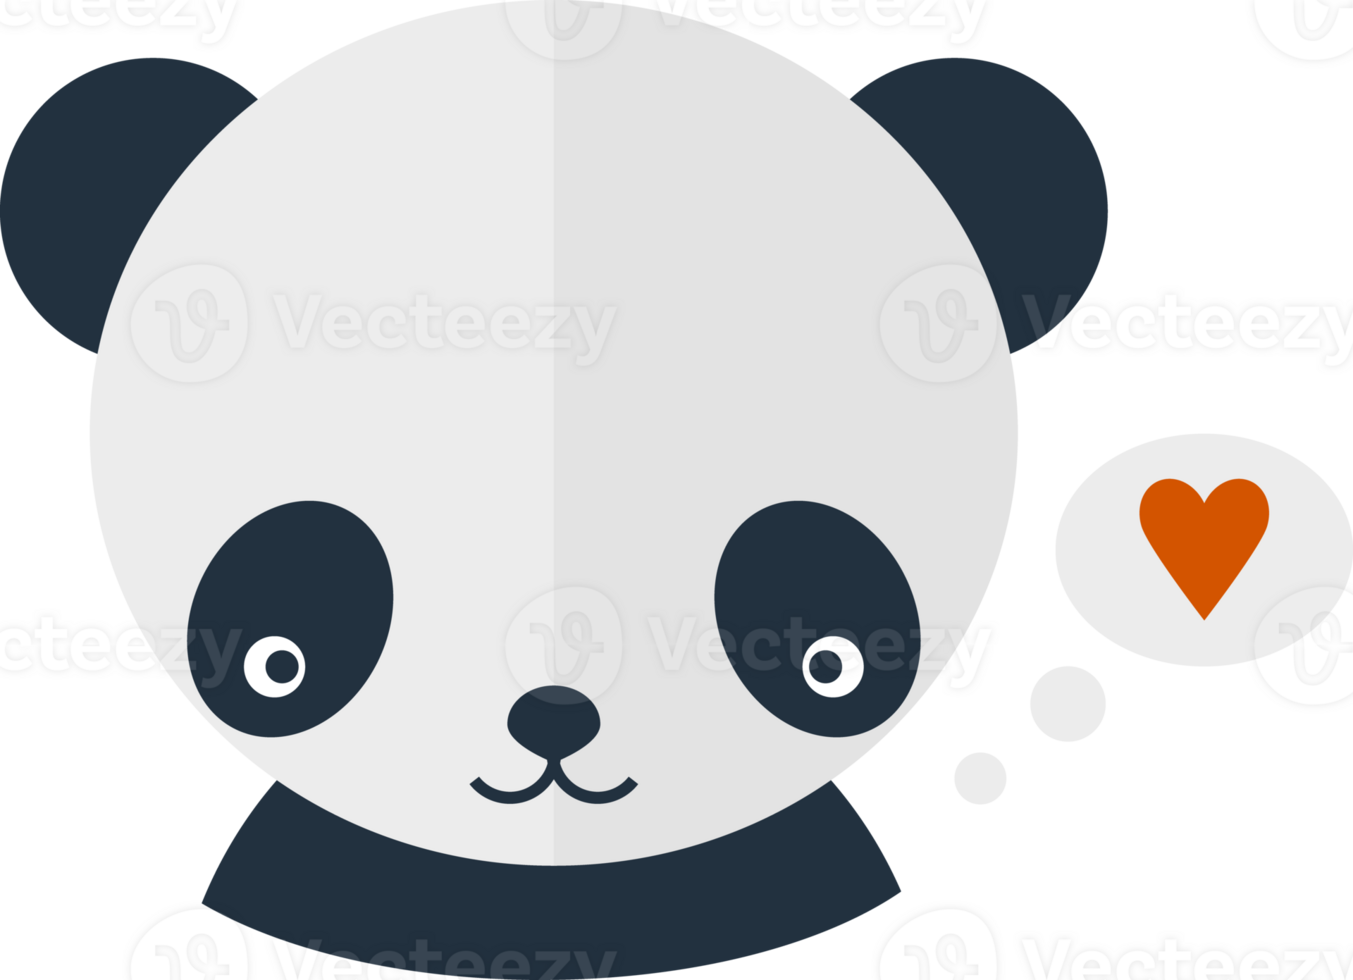 Color avatar panda head in love with heart png